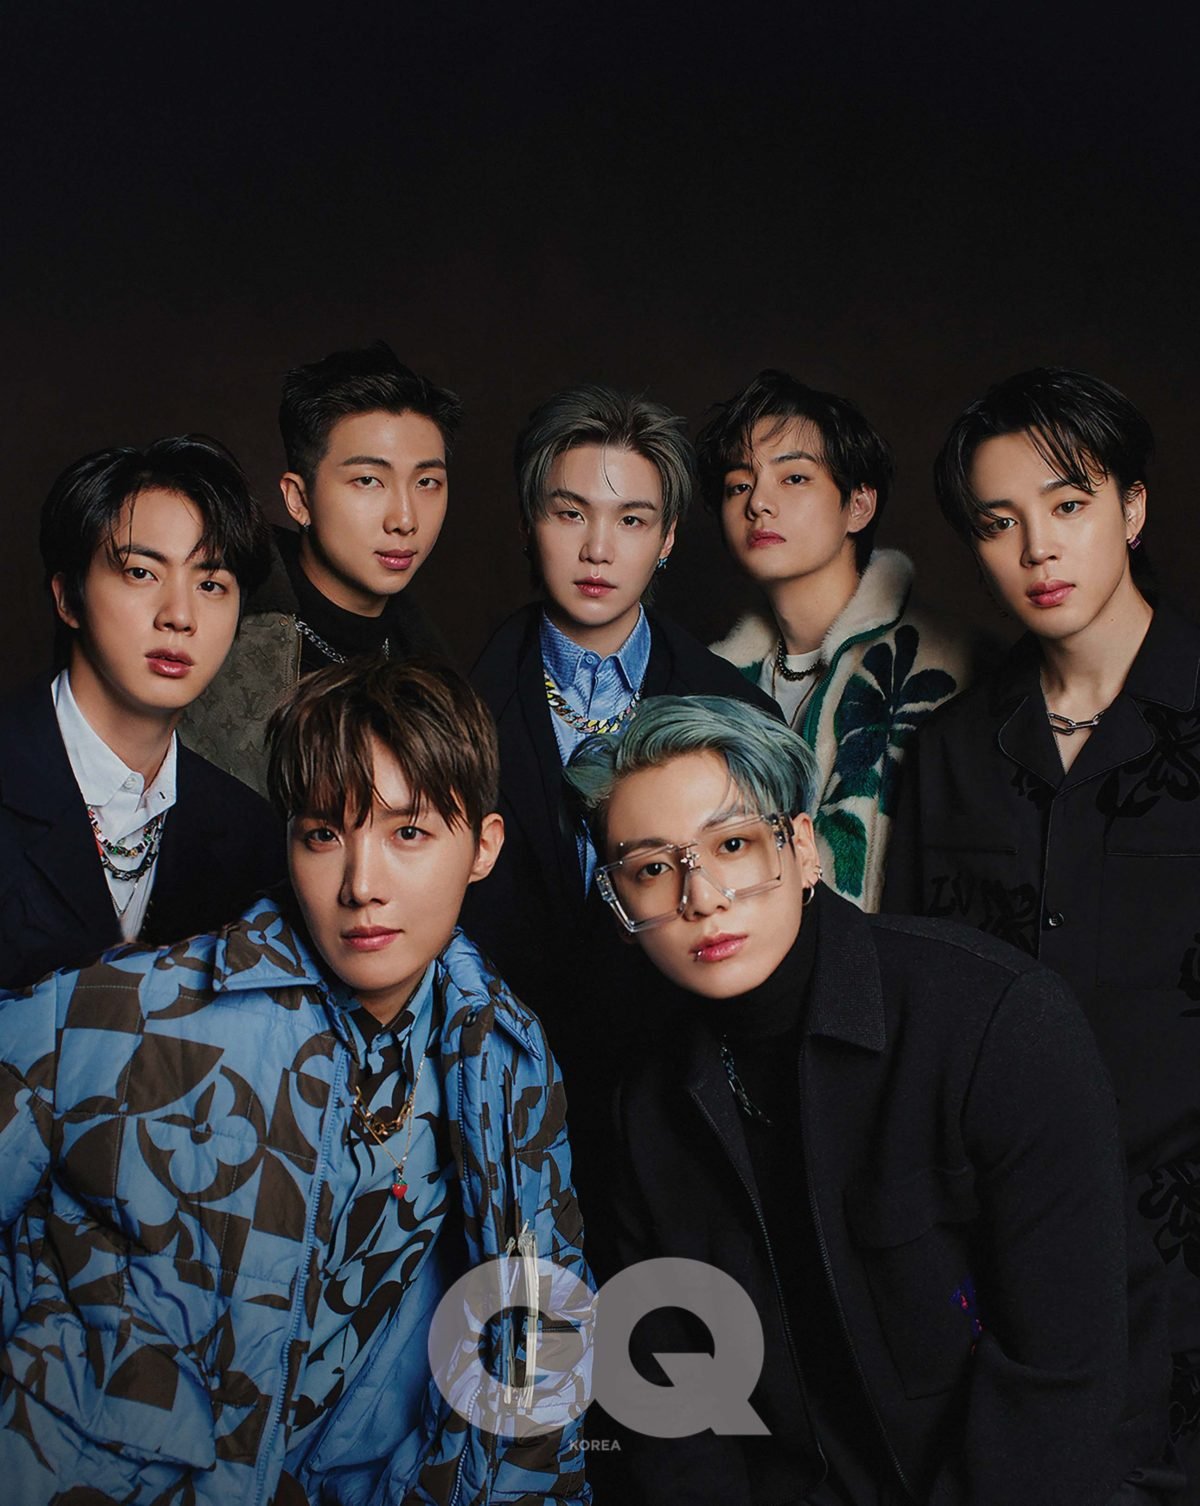 MAGAZINE] BTS X LV by Vogue, GQ (Special January 2022 Issue) — US BTS ARMY